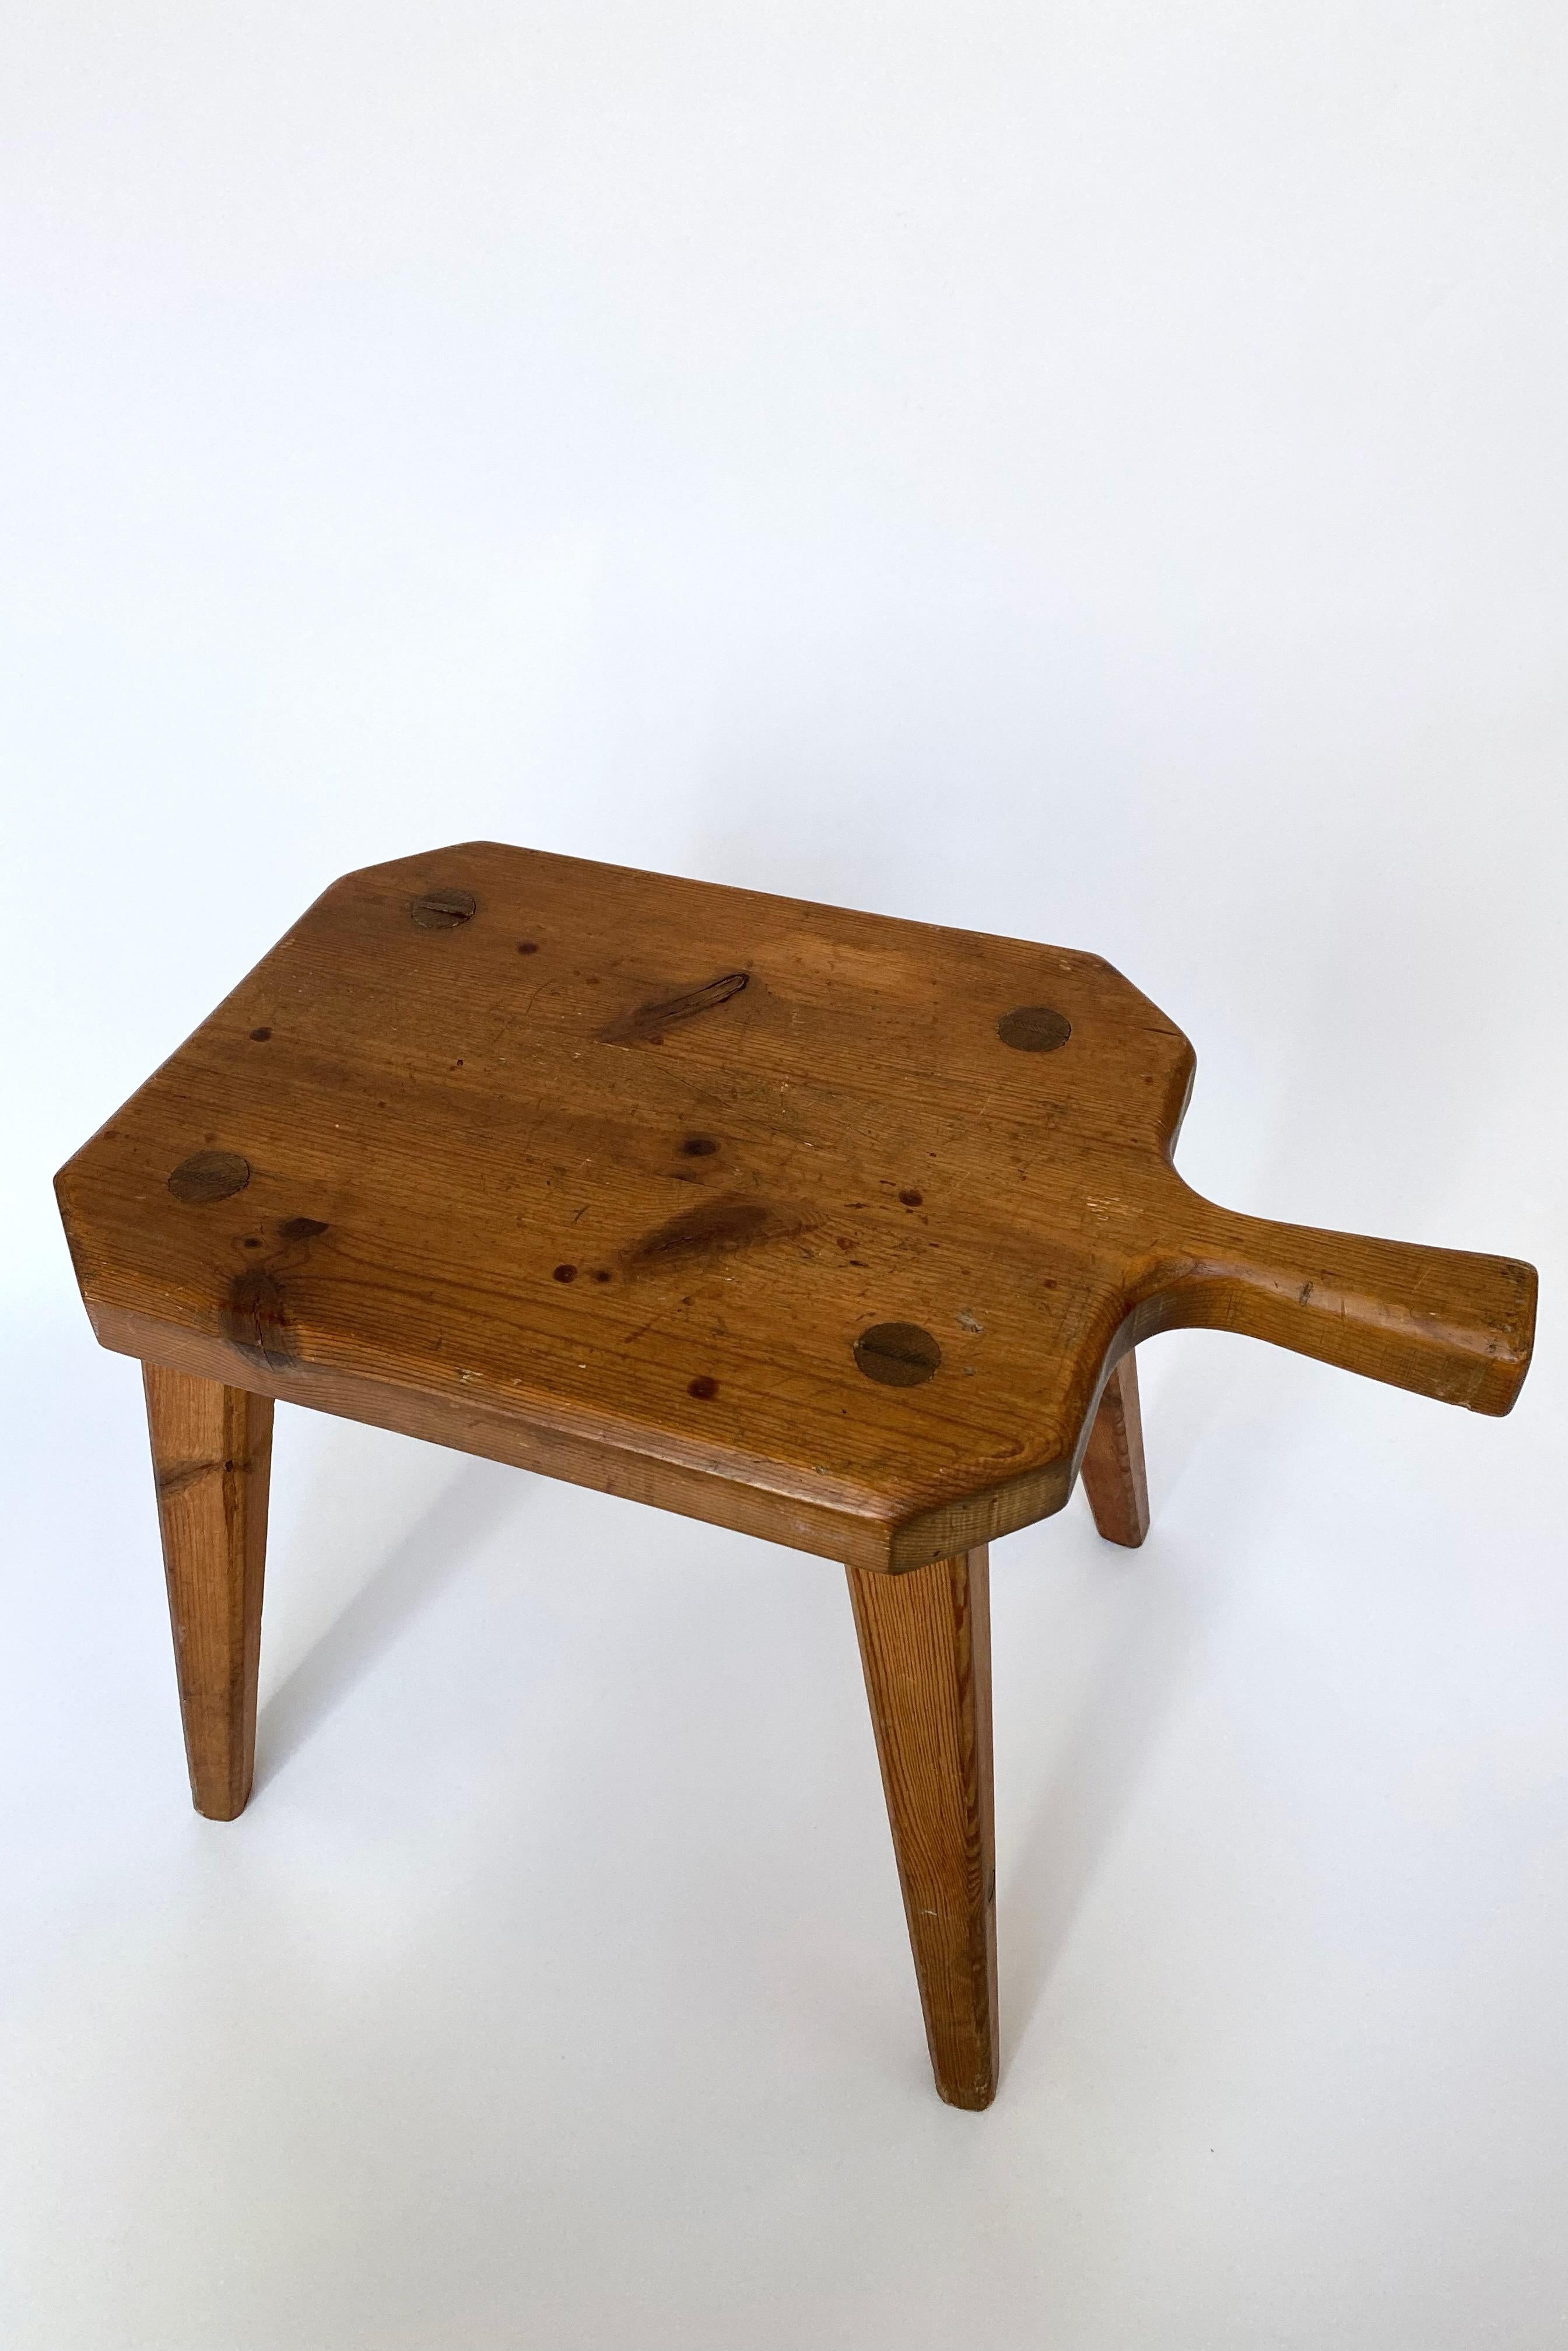 Charming Swedish Pine stool from 1970 with great patina. Spade shaped seat that makes it the perfect small side table or foot stool. Good vintage condition with age appropriate wear, such as stains and smaller cracks.

Country: Sweden

Year: